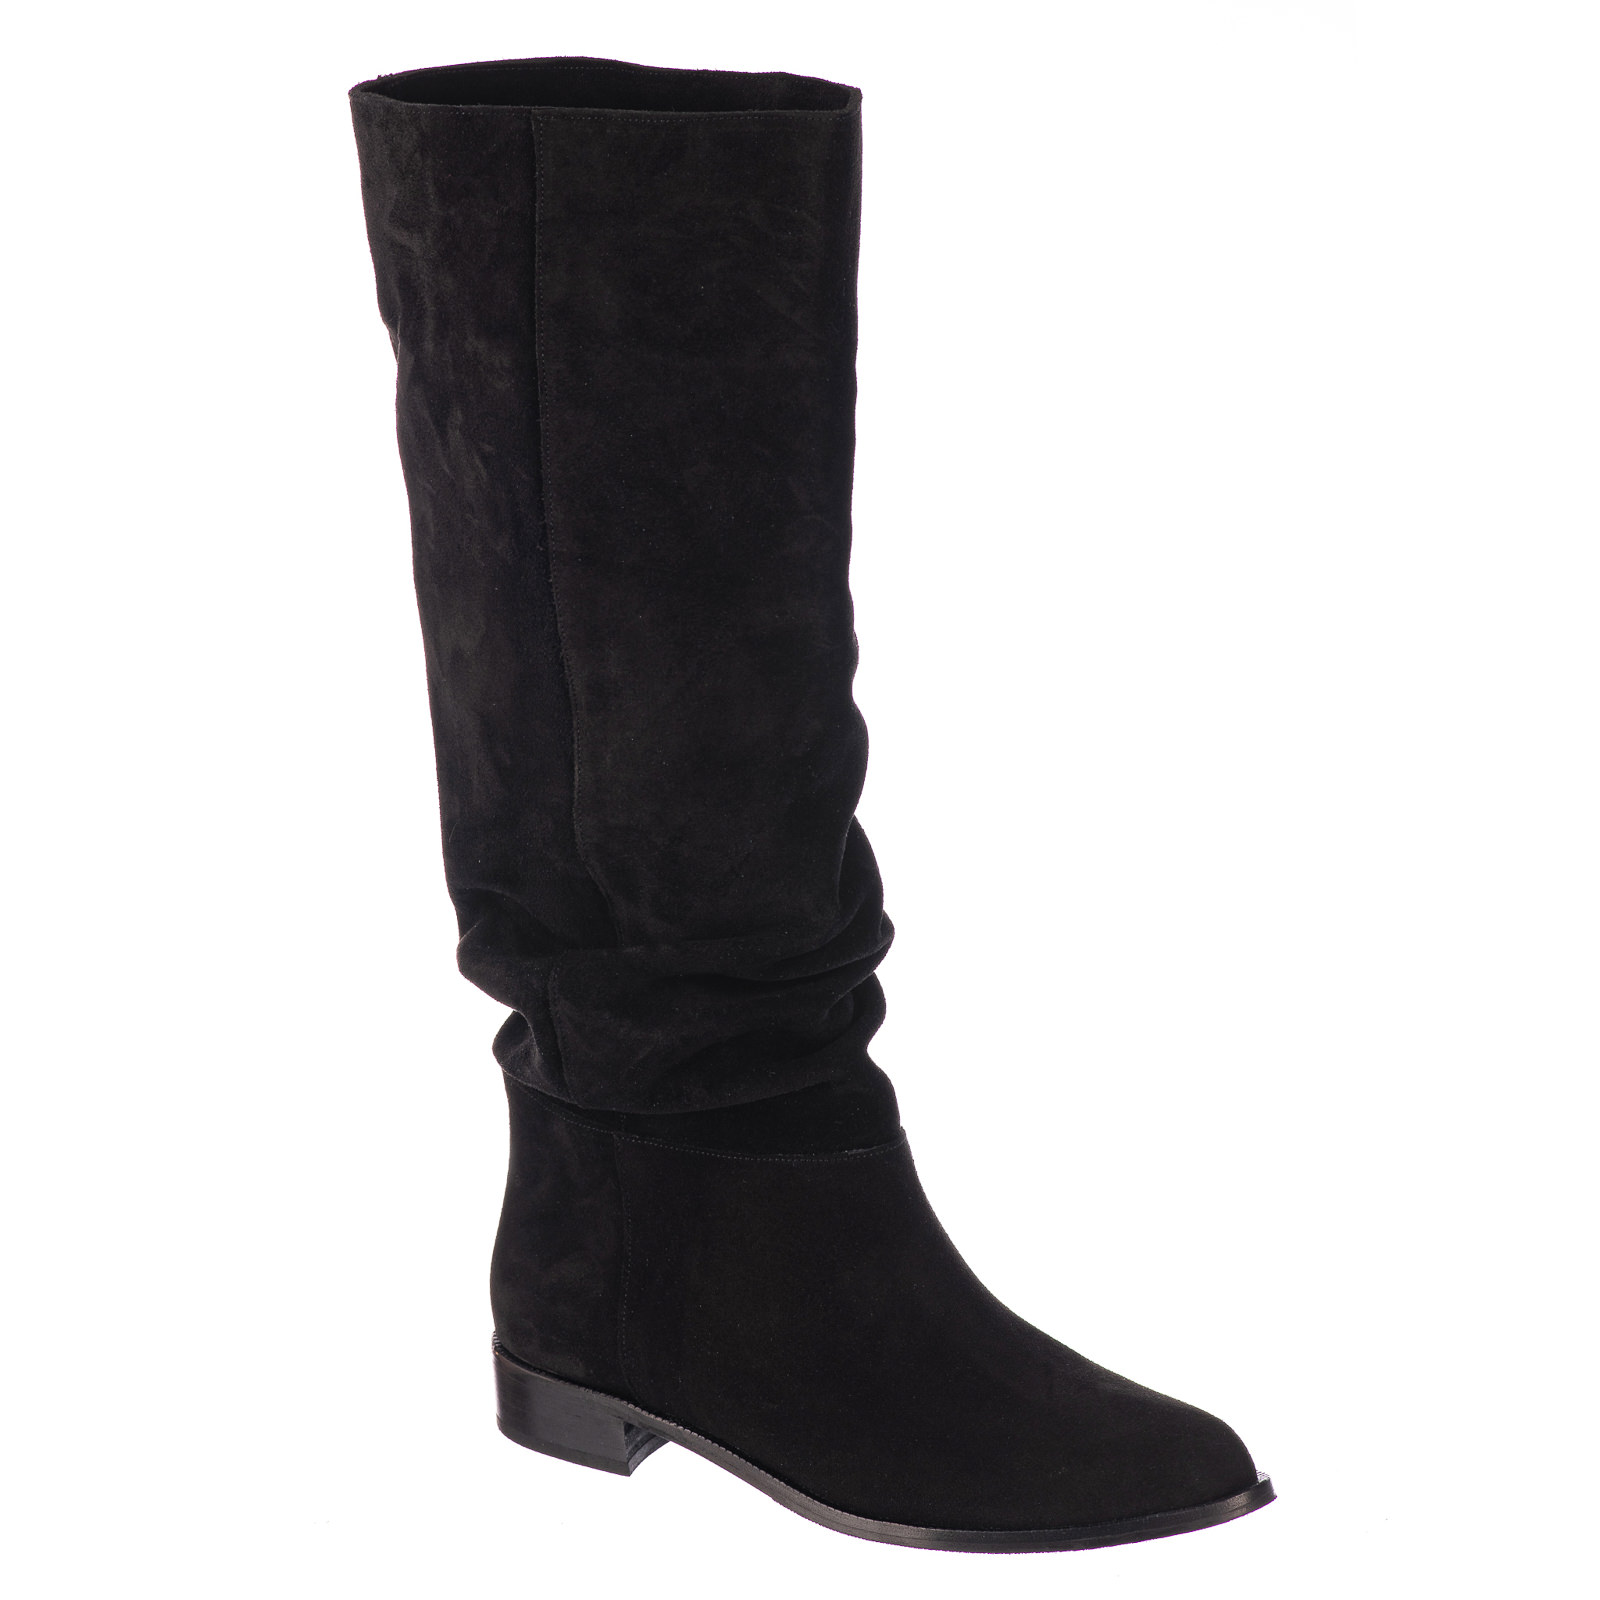 Leather boots B736 - BLACK